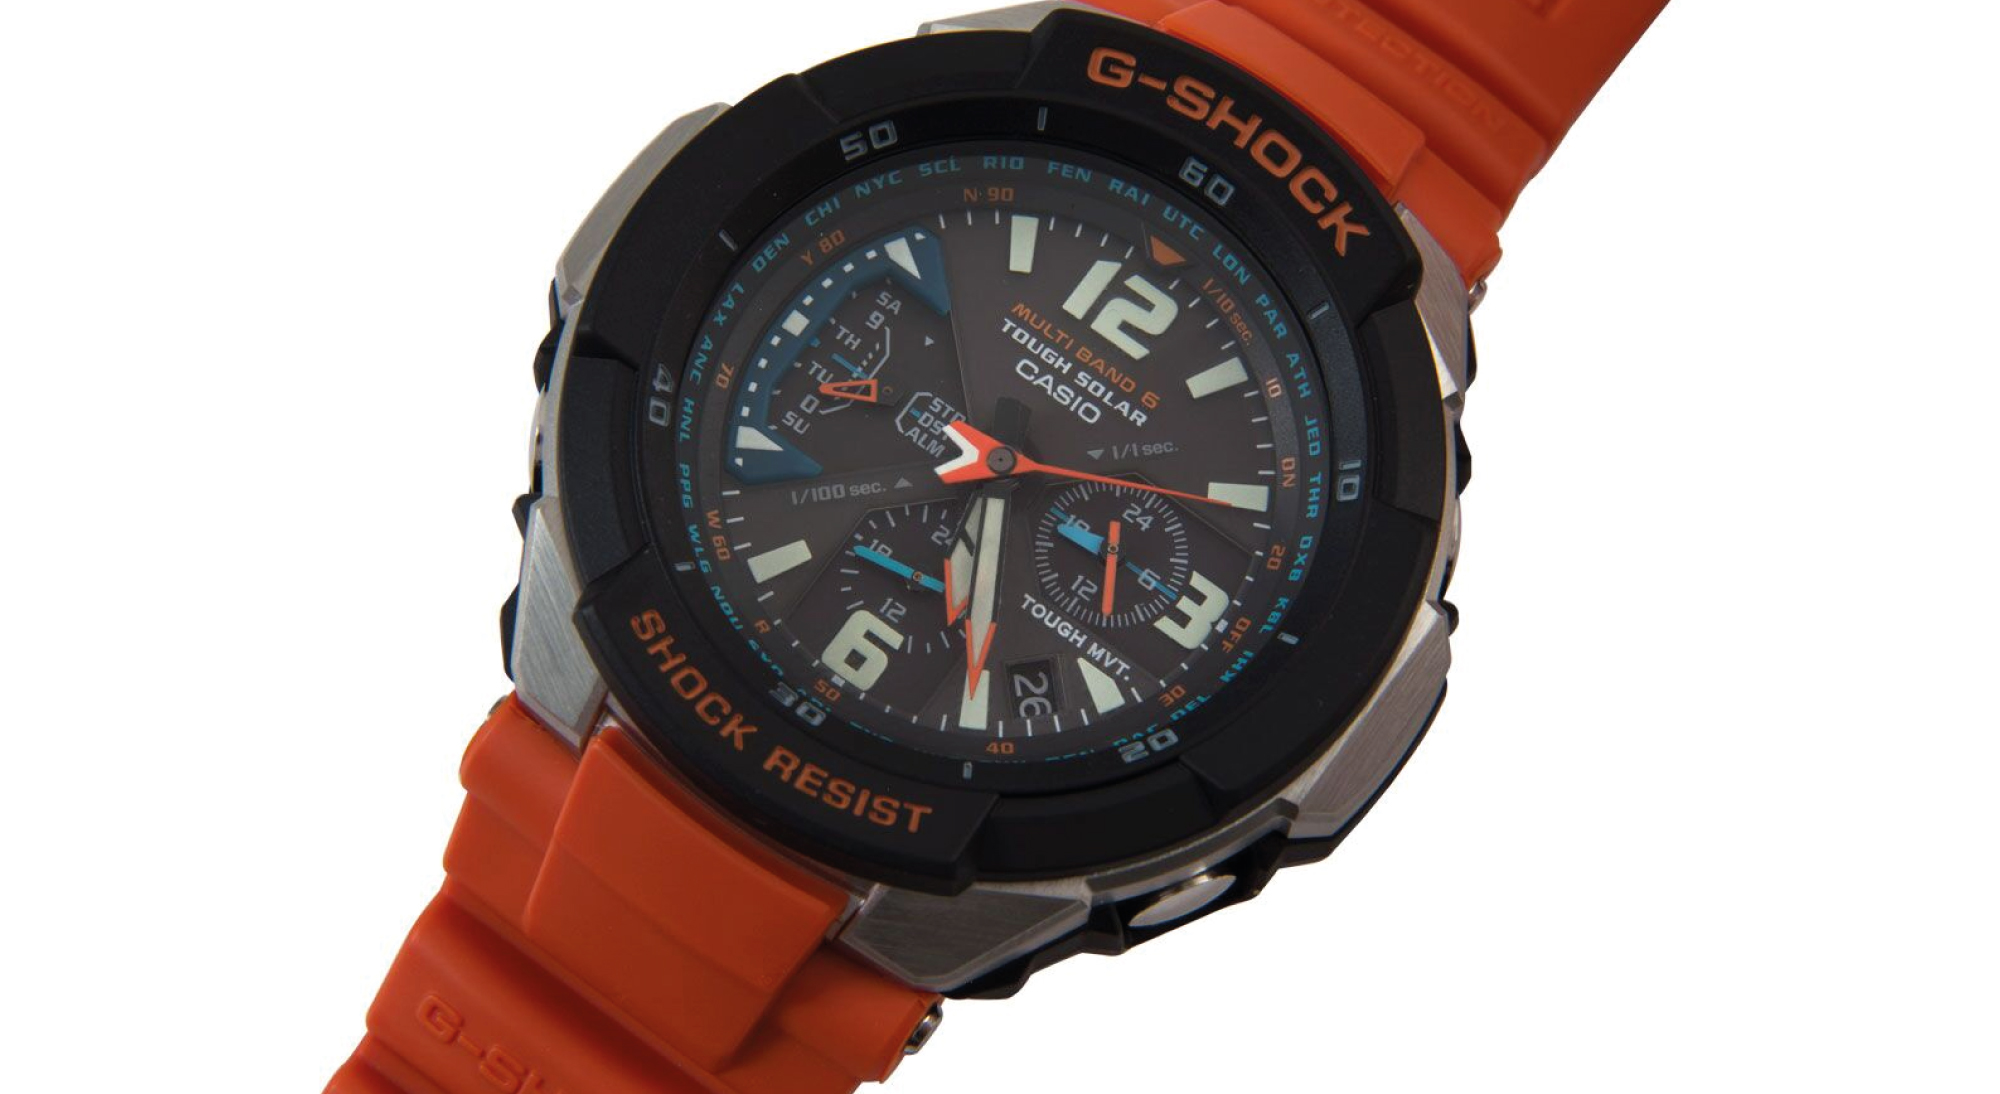 Up close with Casio G-Shock GW-3000M-4AER